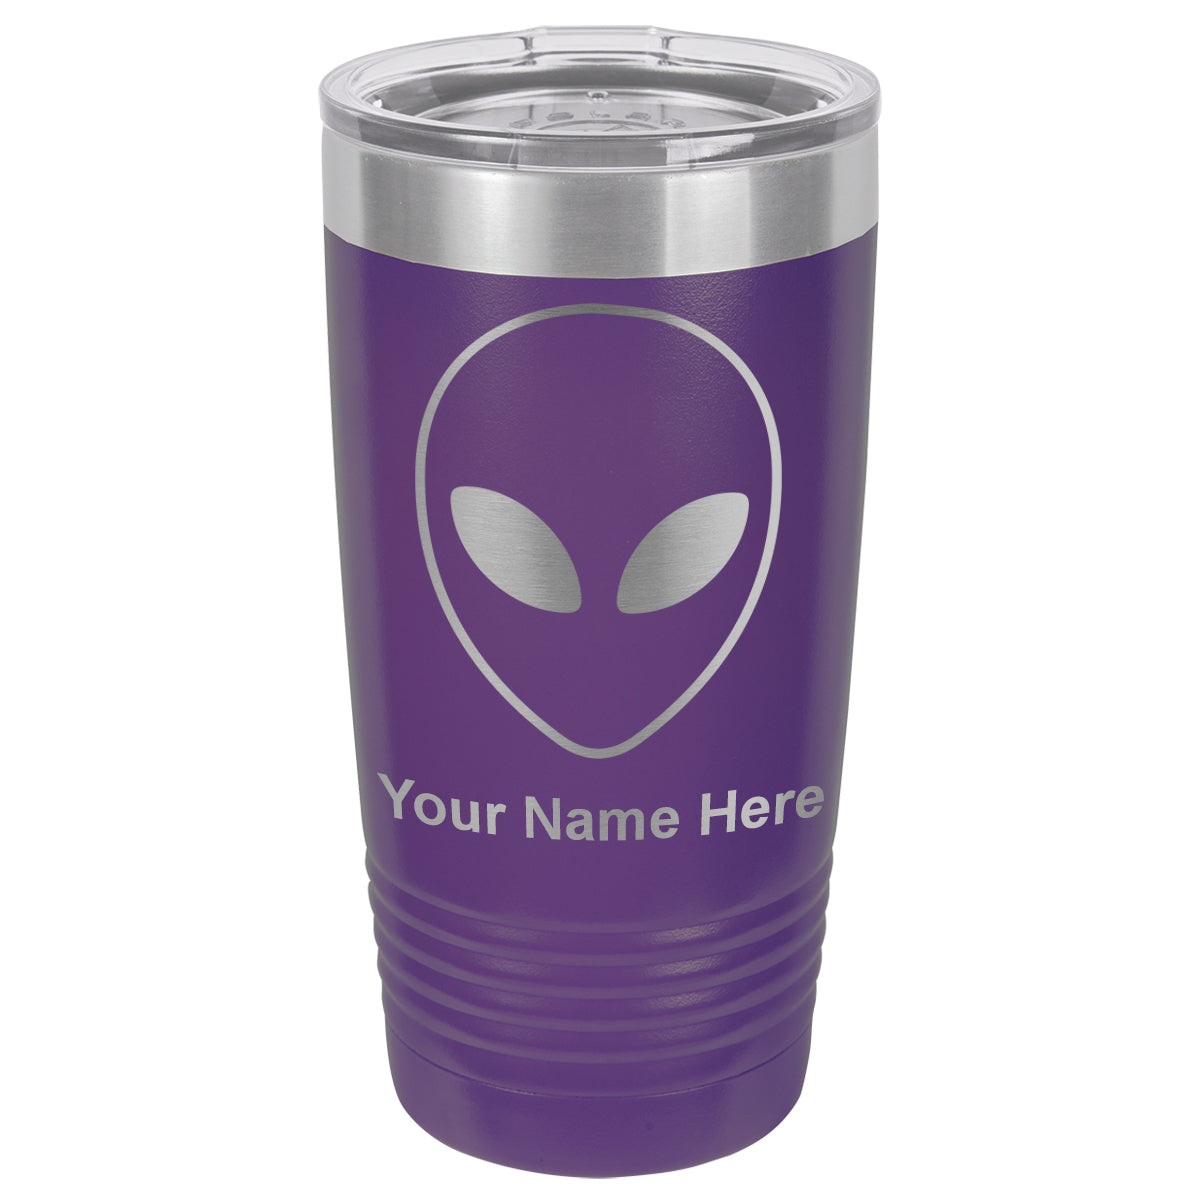 20oz Vacuum Insulated Tumbler Mug, Alien Head, Personalized Engraving Included